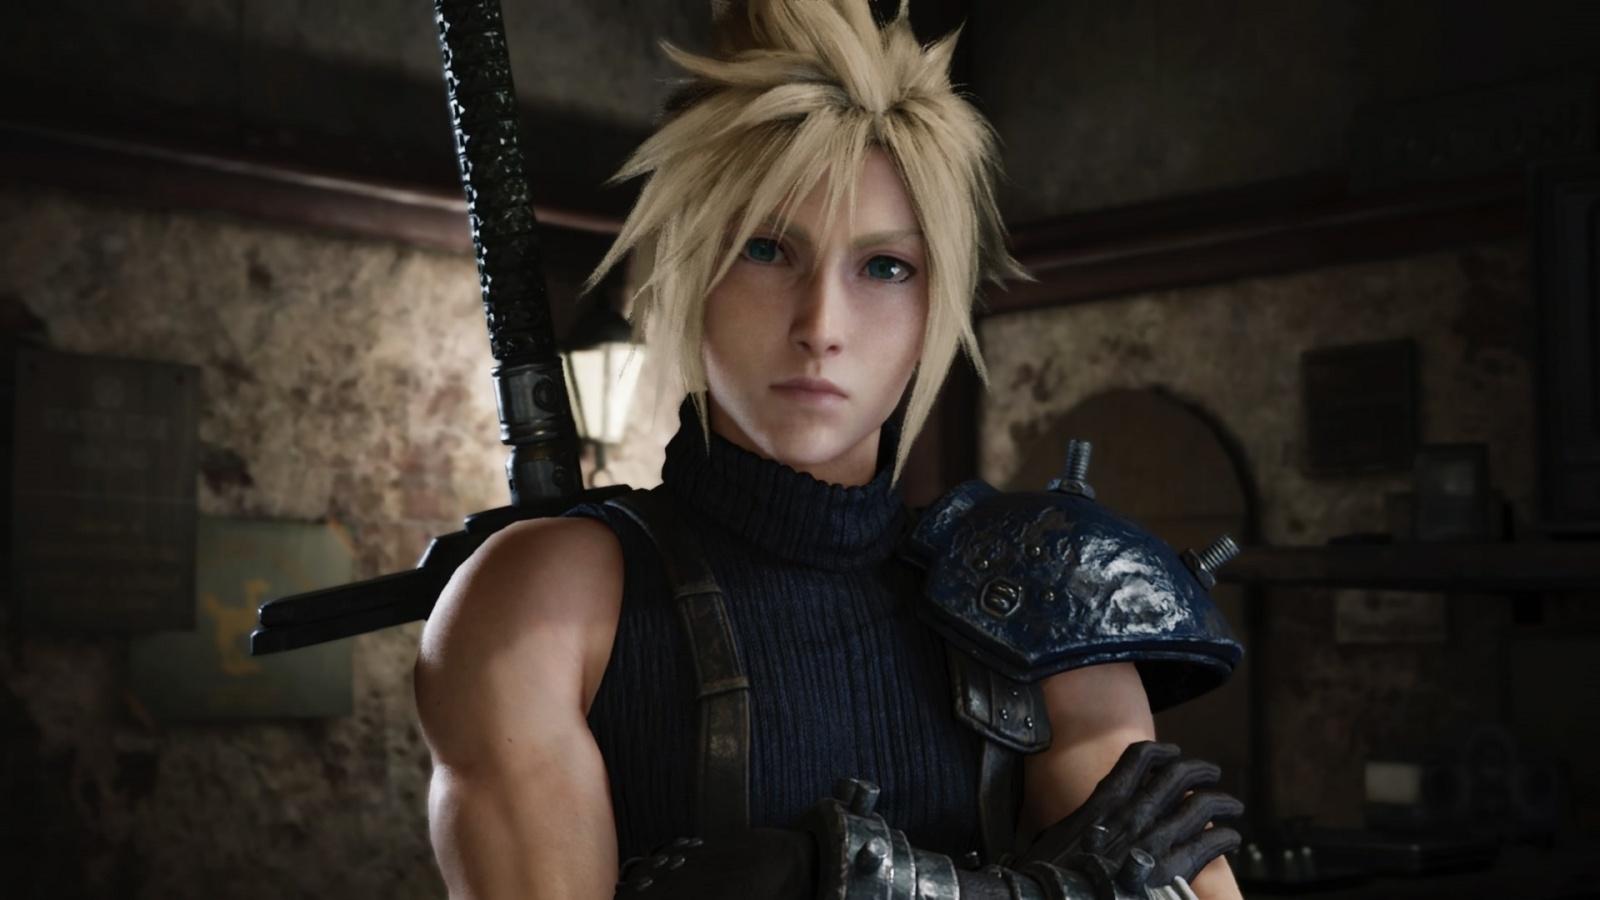 When Is FF7 Remake And FF16 Hitting Xbox? Phil Spencer Responds